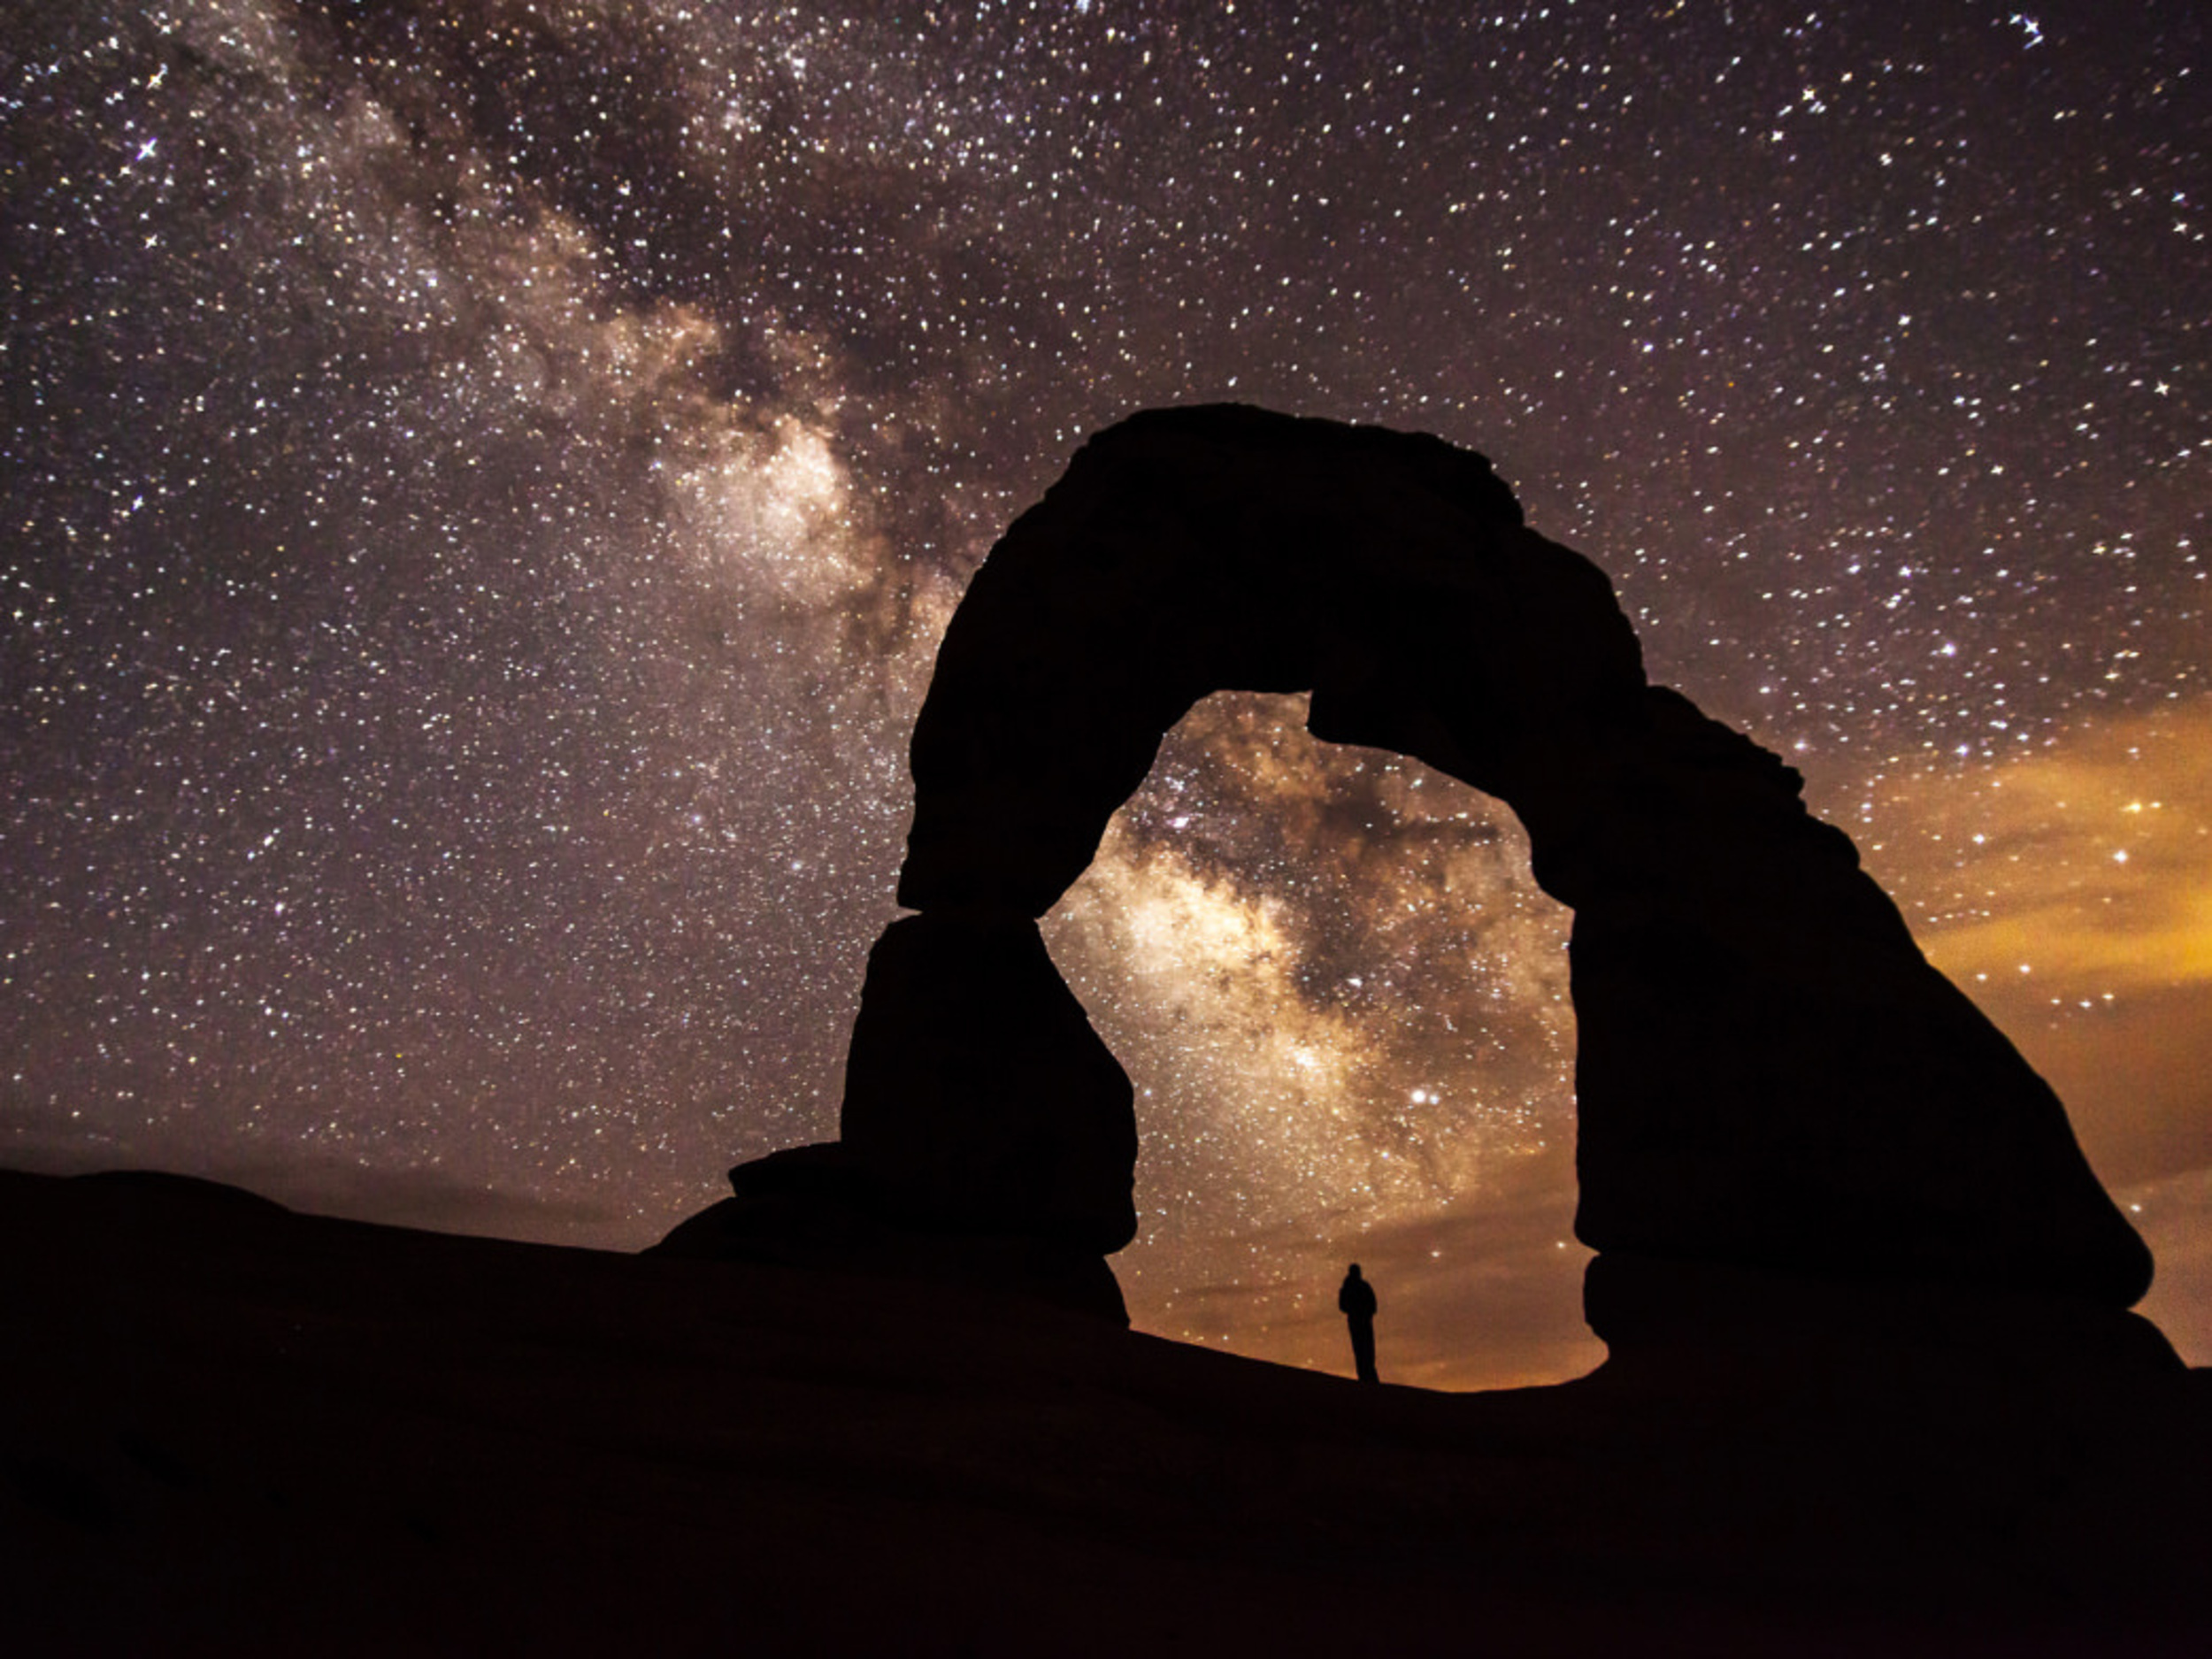 <p>You may need to camp overnight for this one unless you don't mind hanging around after dark. It's absolutely worth it either way. These are some of the clearest and most mesmerizing skies. From the Milky Way to the Big Dipper to the Orion Belt, this is one activity you can't afford to miss.</p>